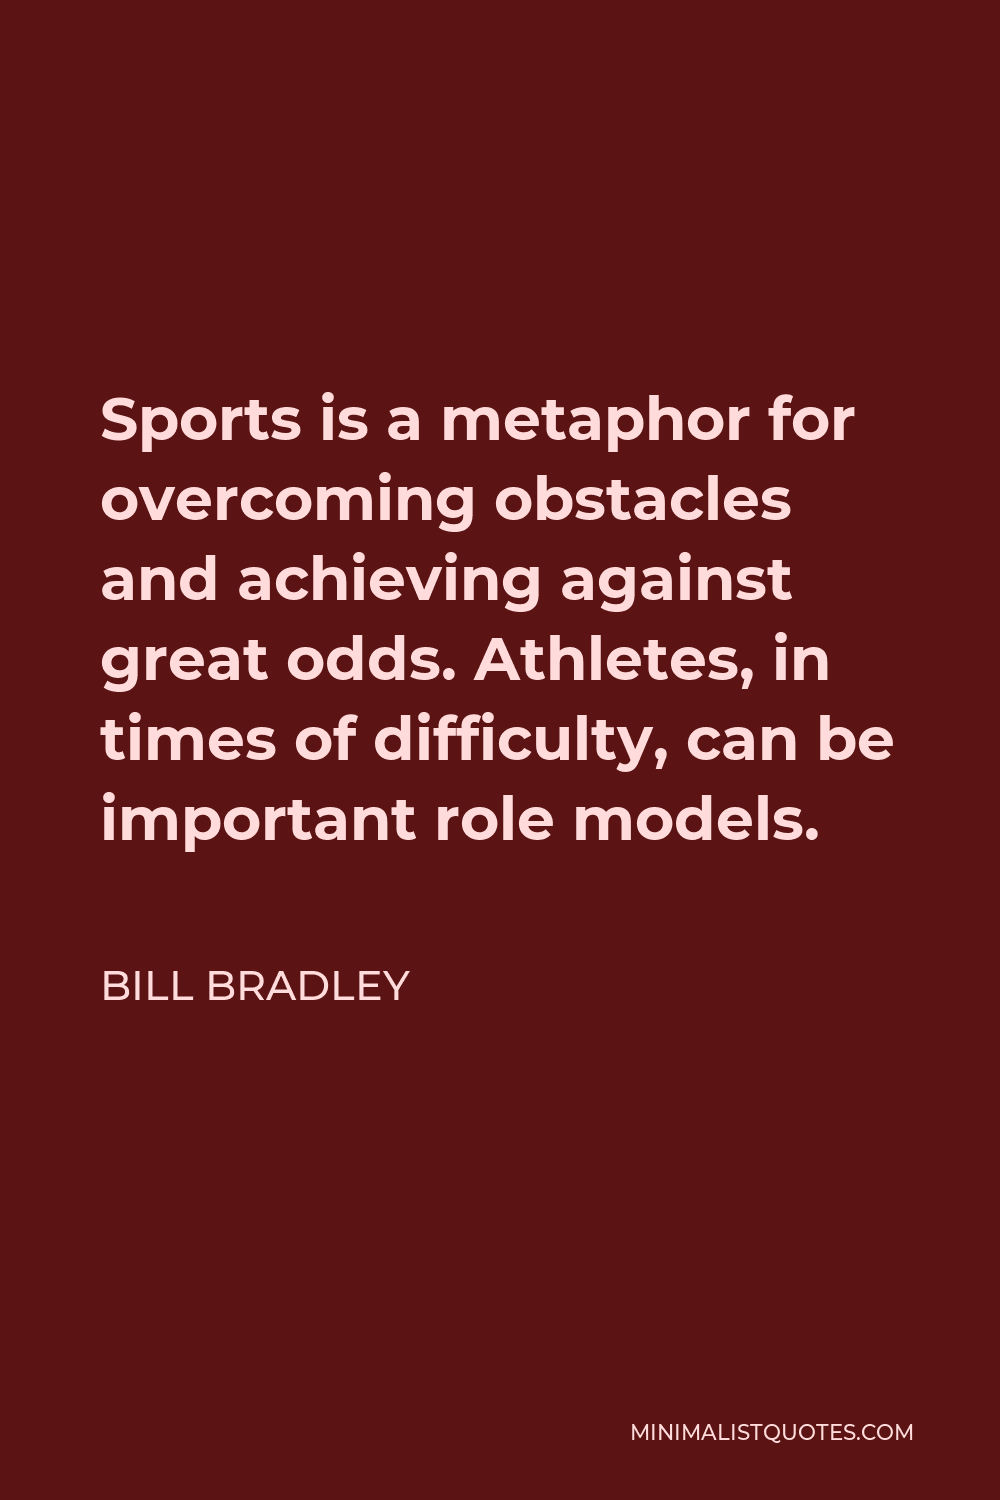 Bill Bradley Quote - Sports is a metaphor for overcoming obstacles and achieving against great odds. Athletes, in times of difficulty, can be important role models.